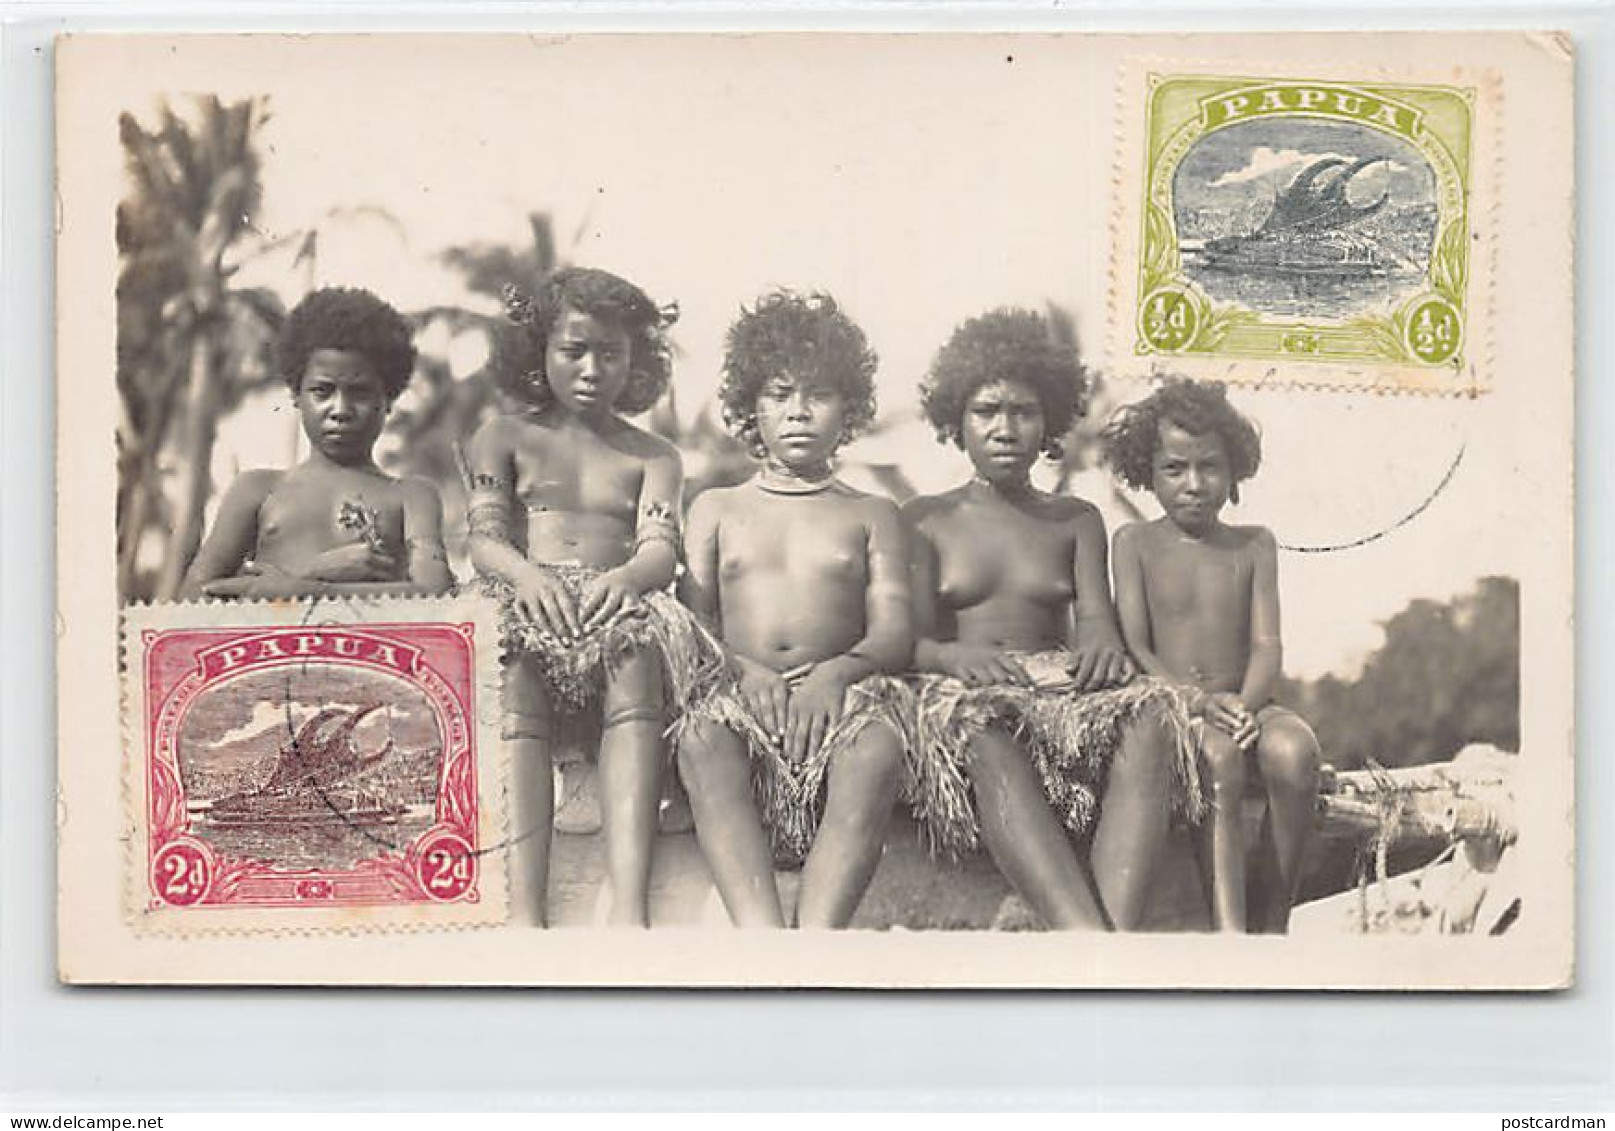 Papua New Guinea - ETHNIC NUDE - Native Girls - REAL PHOTO - Publ. Unknown (Koda - Papouasie-Nouvelle-Guinée